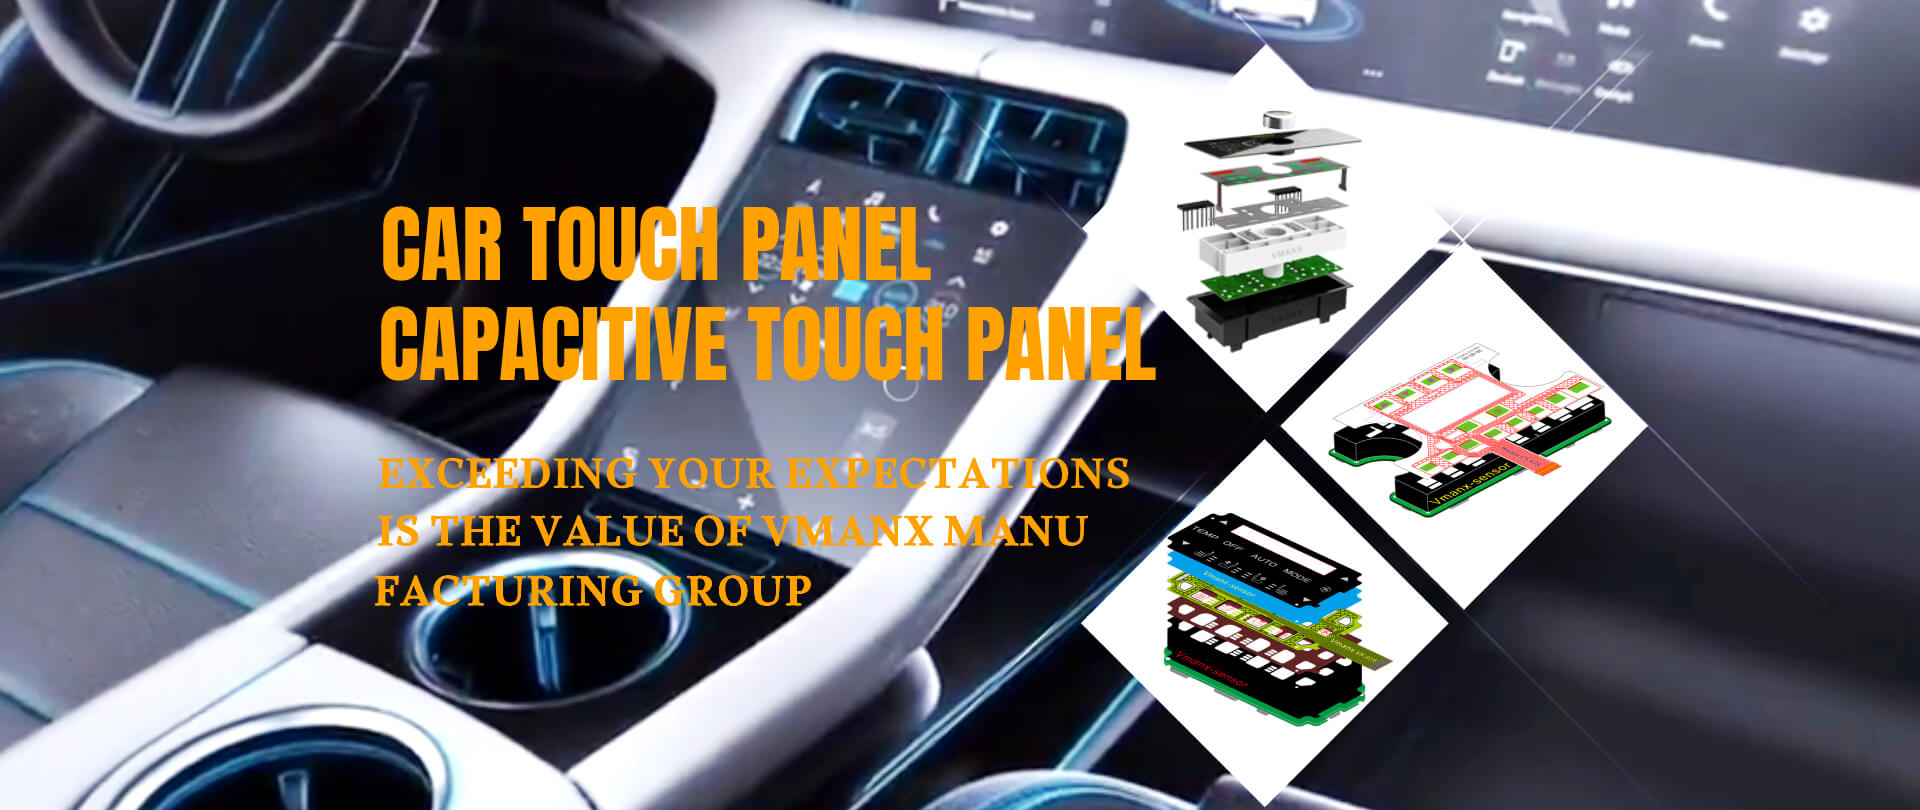 Car touch panel